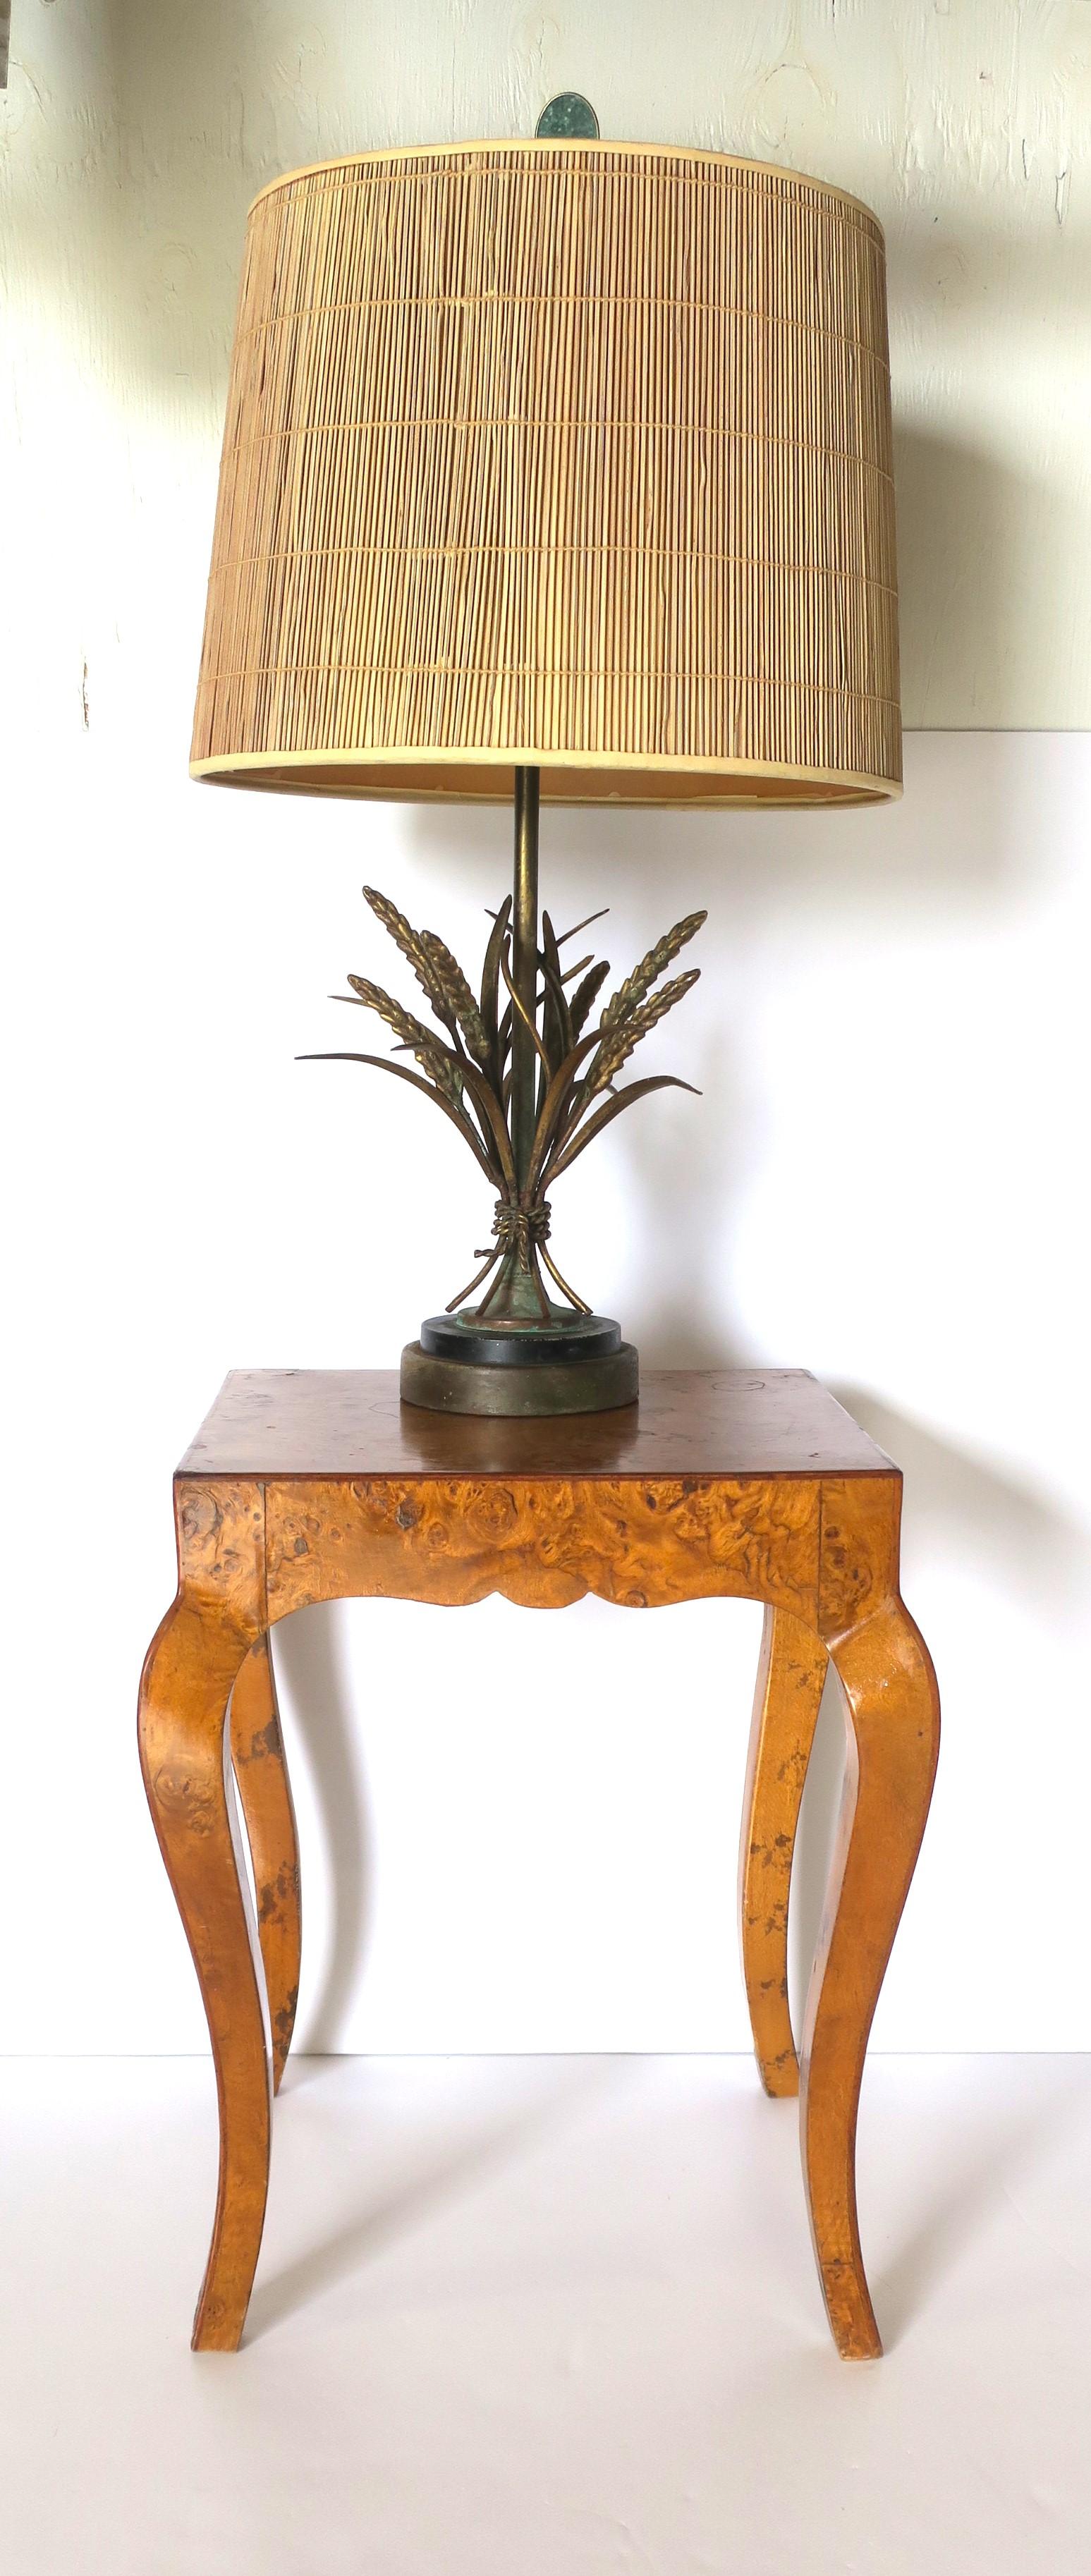 20th Century Italian Gold Gilt Brass Sheaf of Wheat Desk or Table Lamp After Maison Baguès For Sale